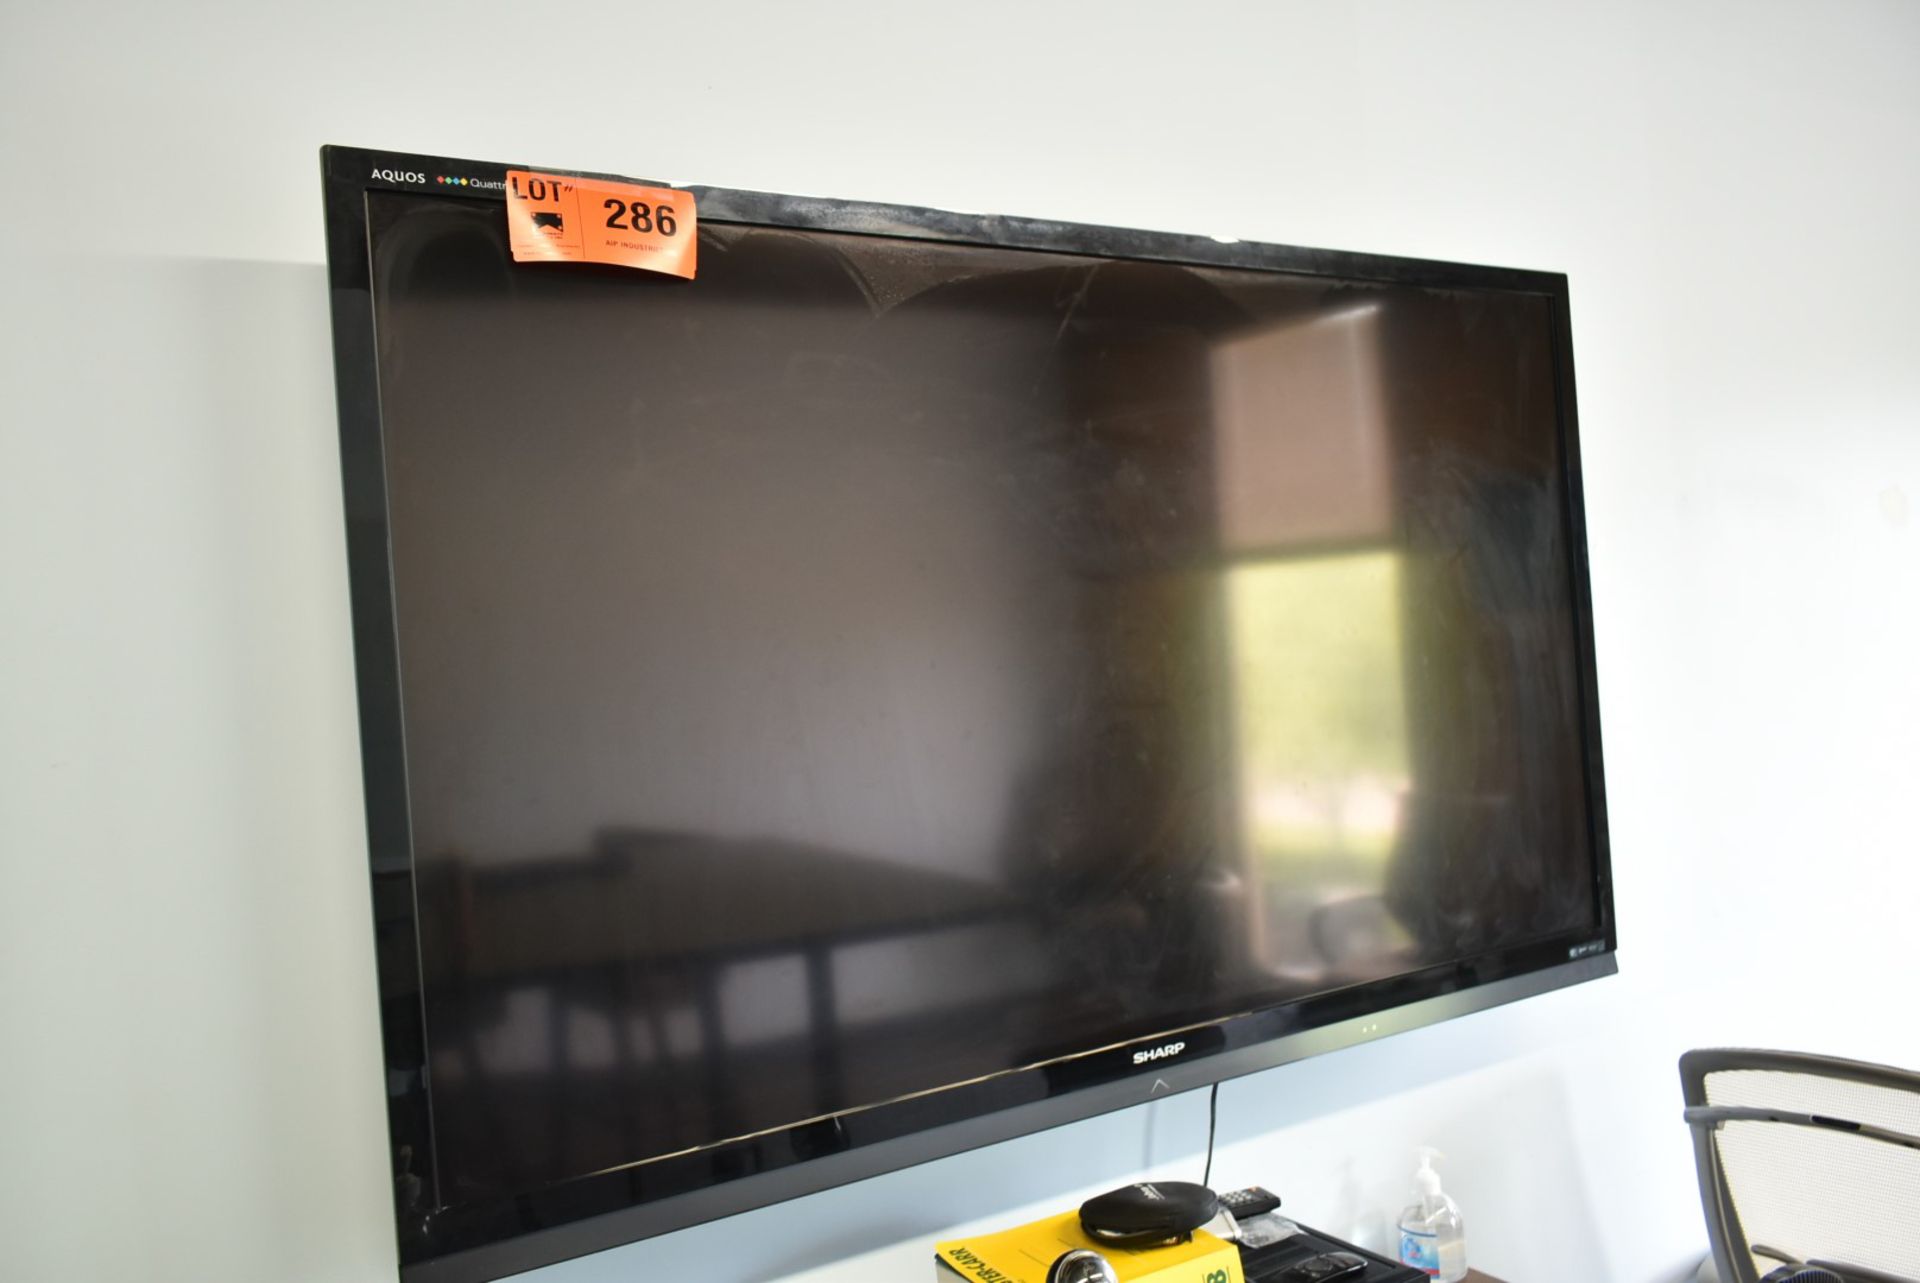 SHARP 60" FLAT SCREEN TV [RIGGING FOR LOT #286 - $25 CAD PLUS APPLICABLE TAXES]